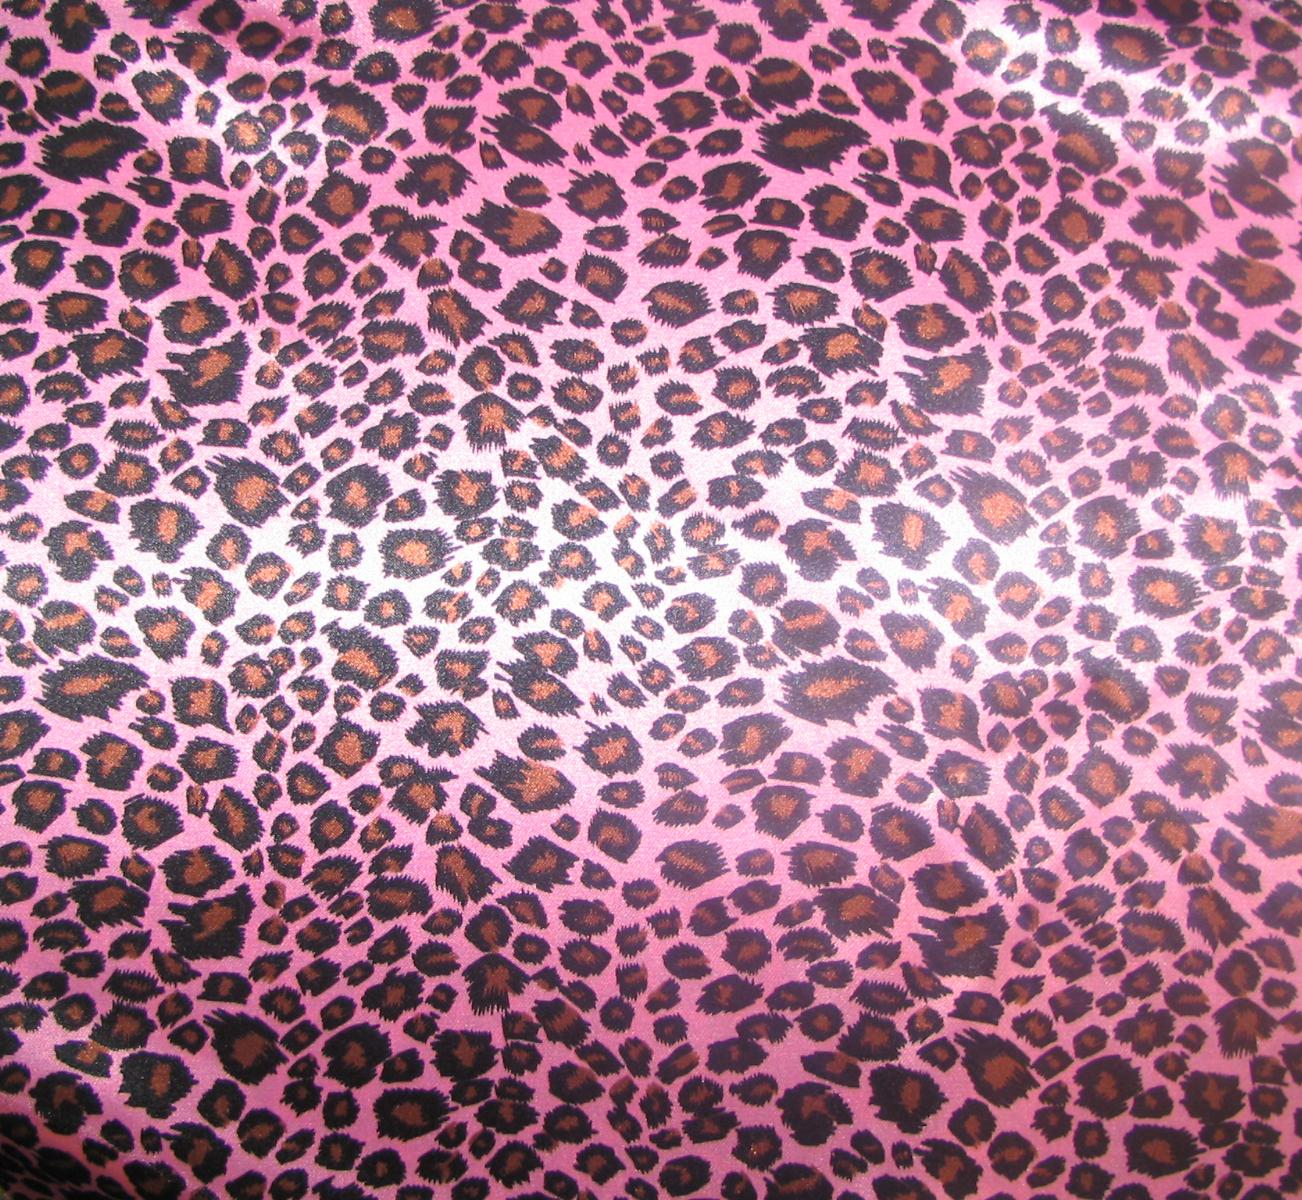 Pink Leopard Wallpaper Images  Free Photos PNG Stickers Wallpapers   Backgrounds  rawpixel